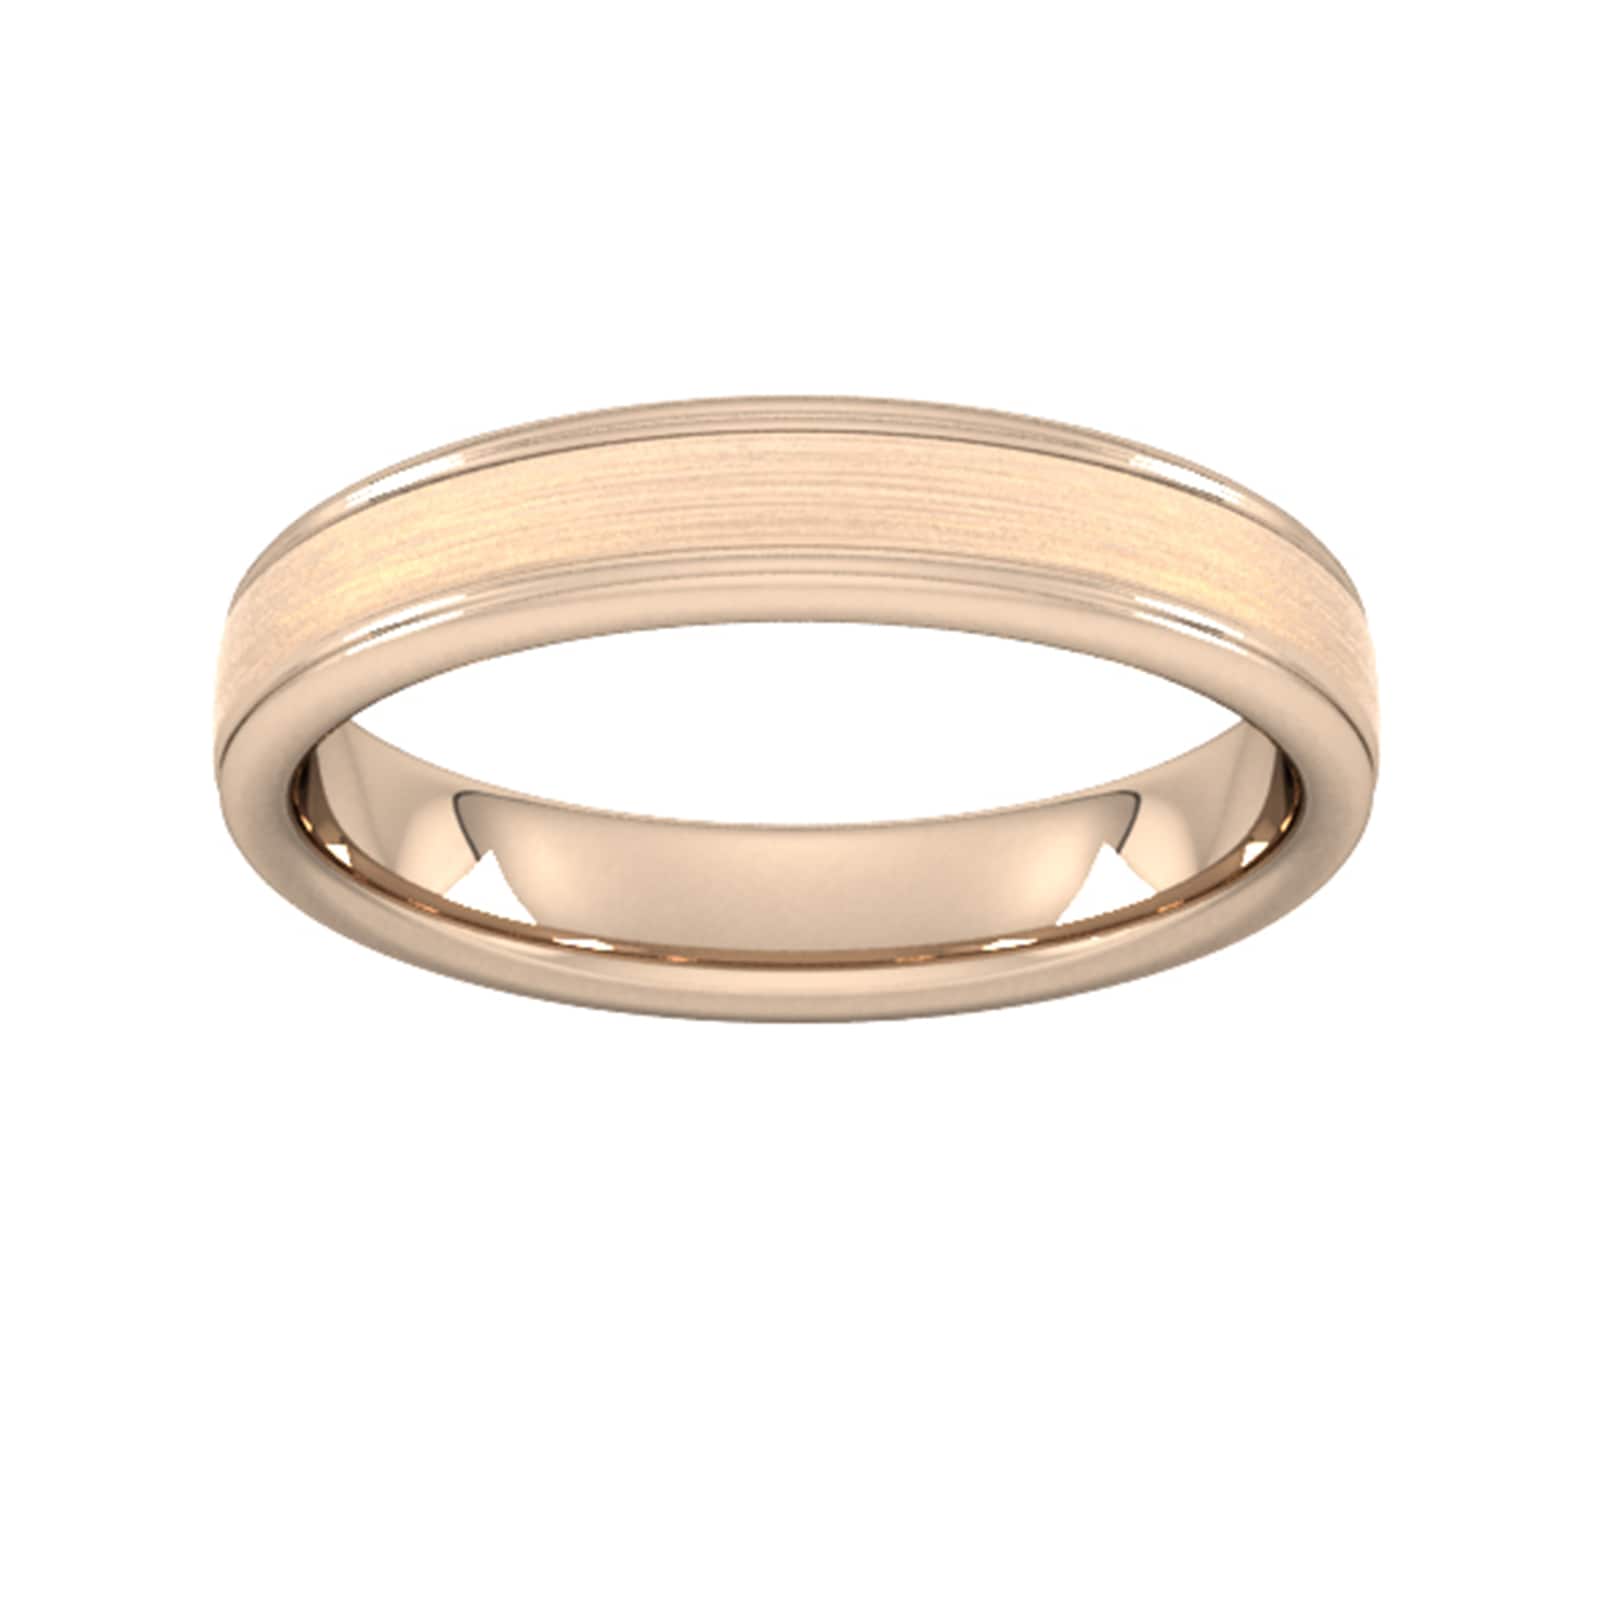 4mm Slight Court Extra Heavy Matt Centre With Grooves Wedding Ring In 18 Carat Rose Gold - Ring Size I